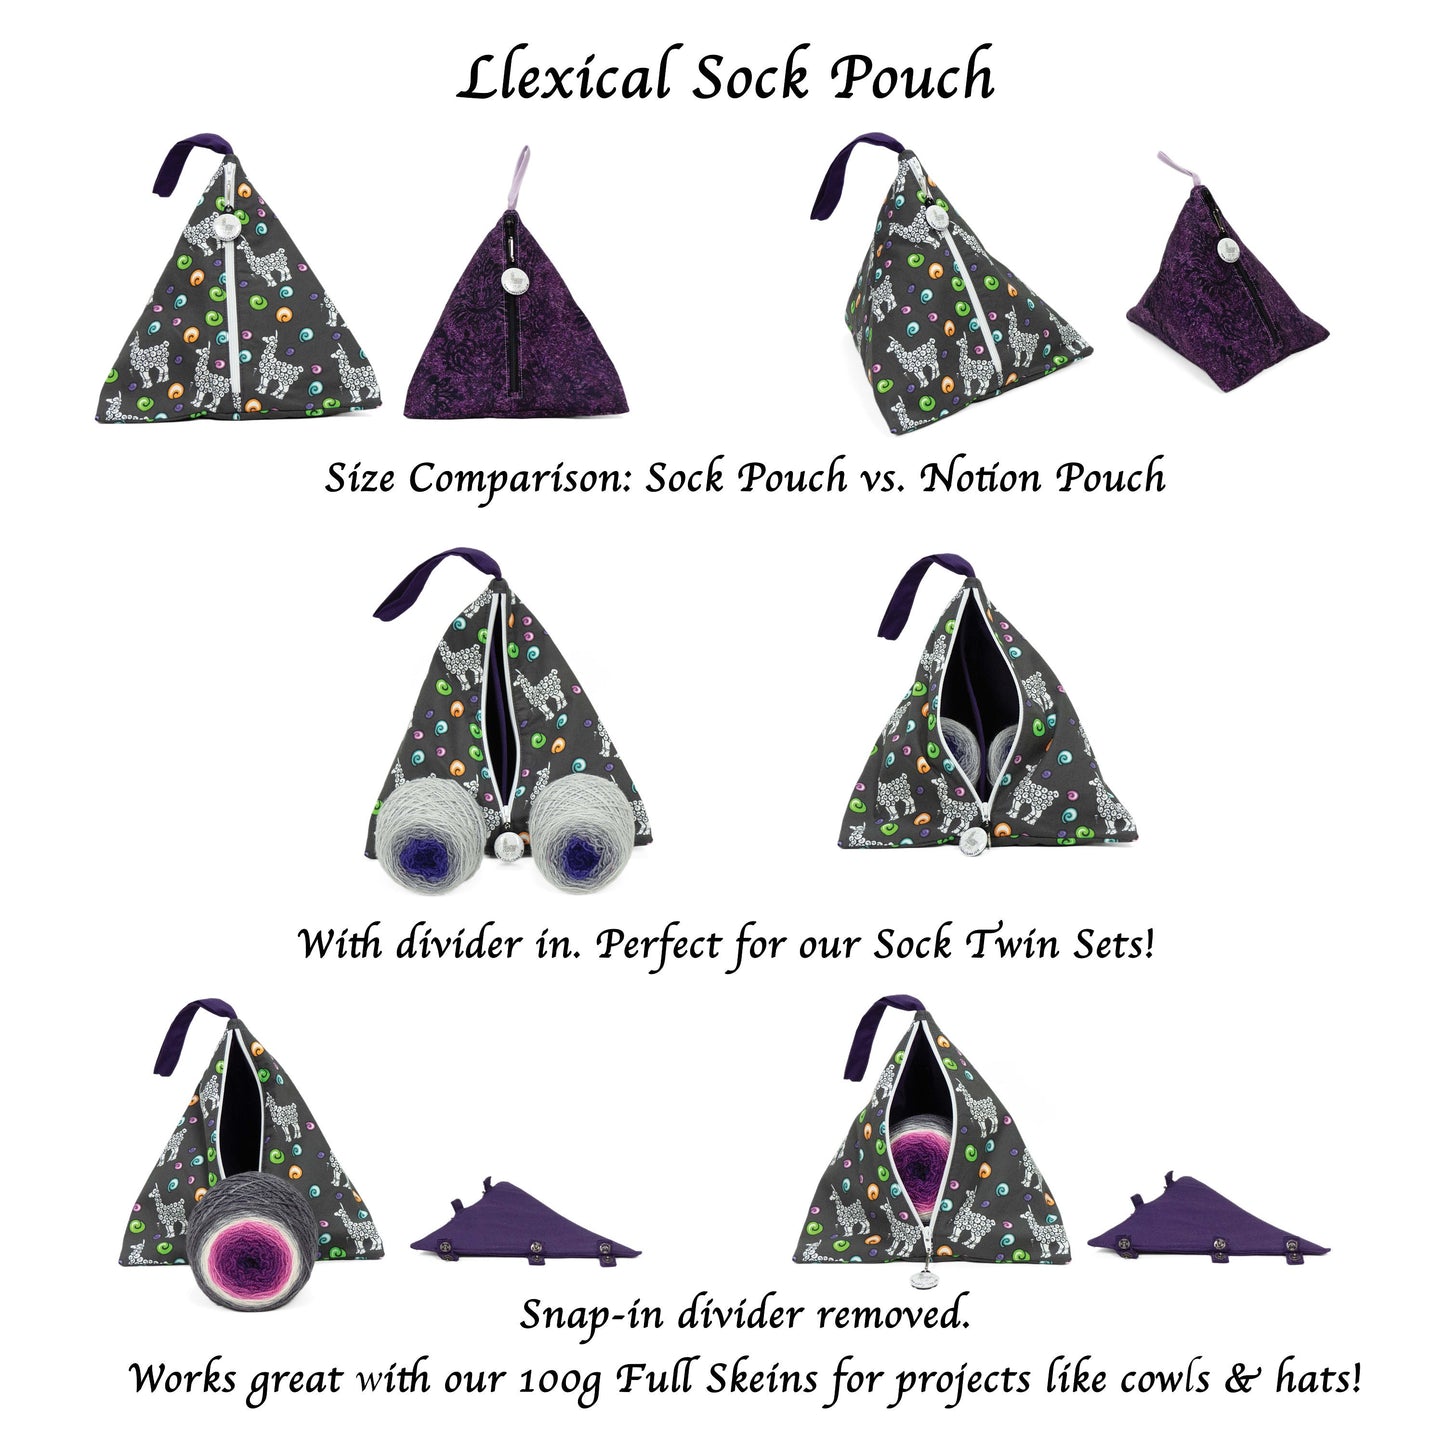 Wingcrest - Llexical Divided Sock Pouch - Knitting, Crochet, Spinning Project Bag